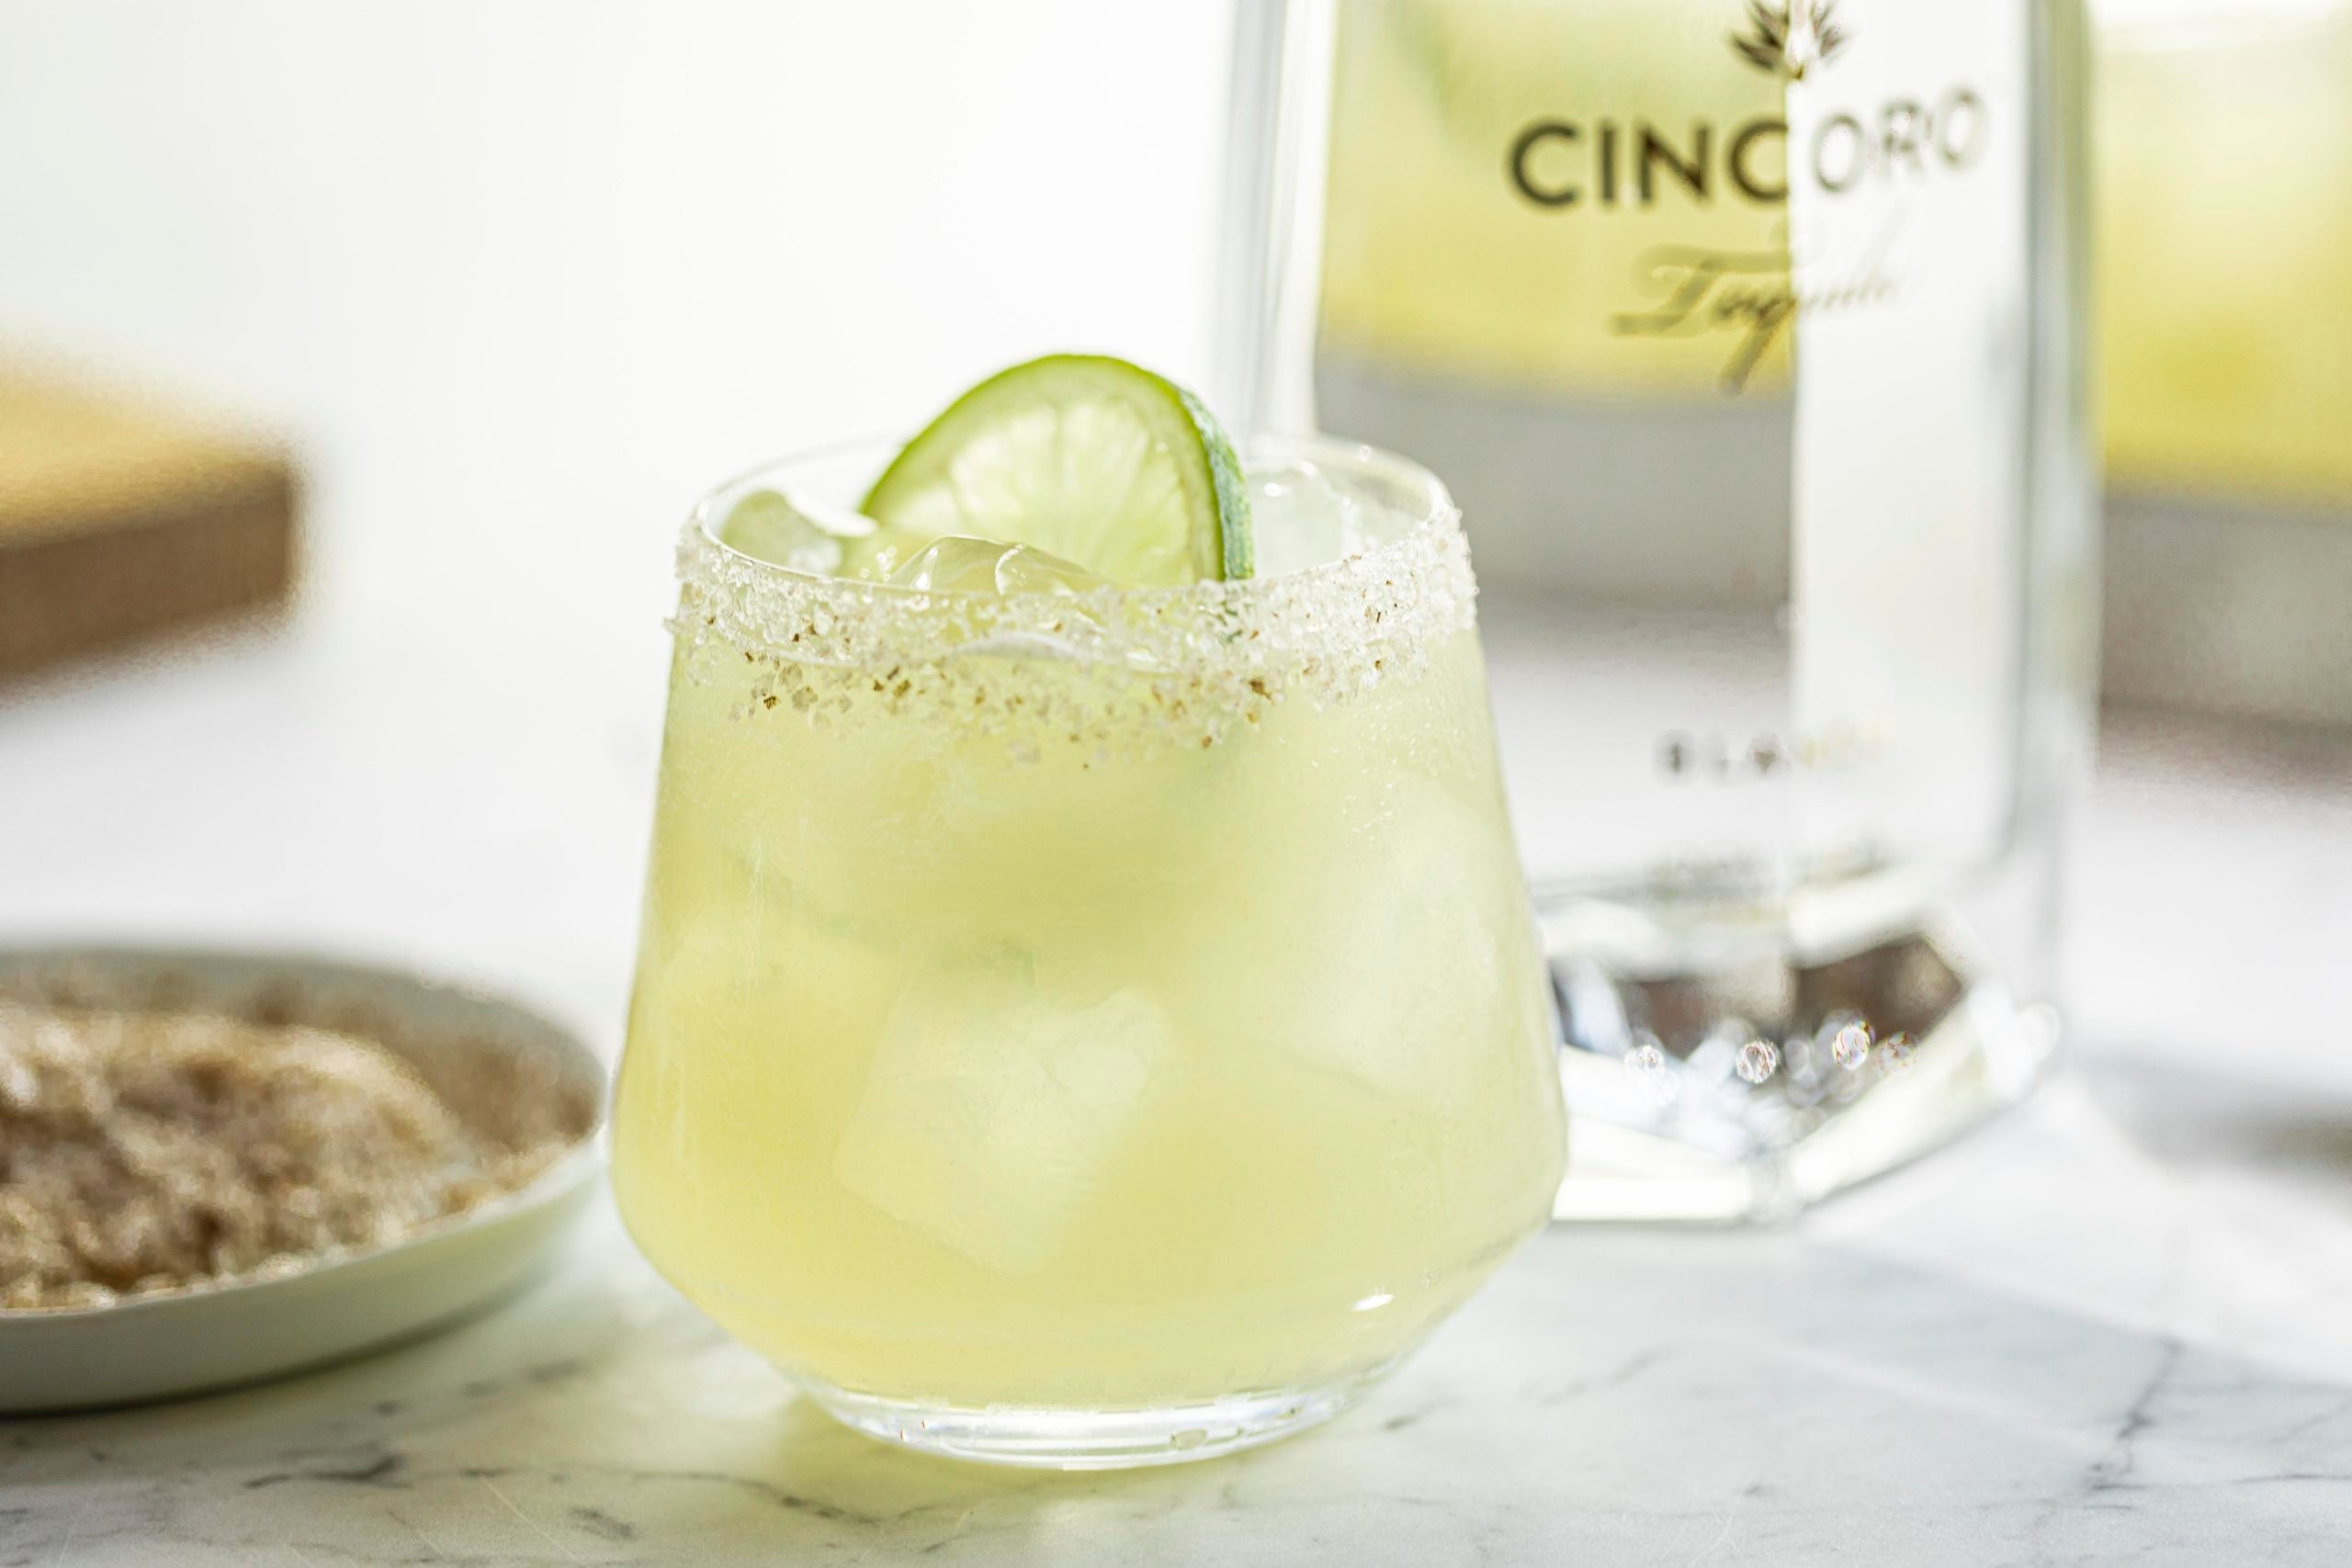 Cocktail of the Week: Cincoro Tequila Margarita